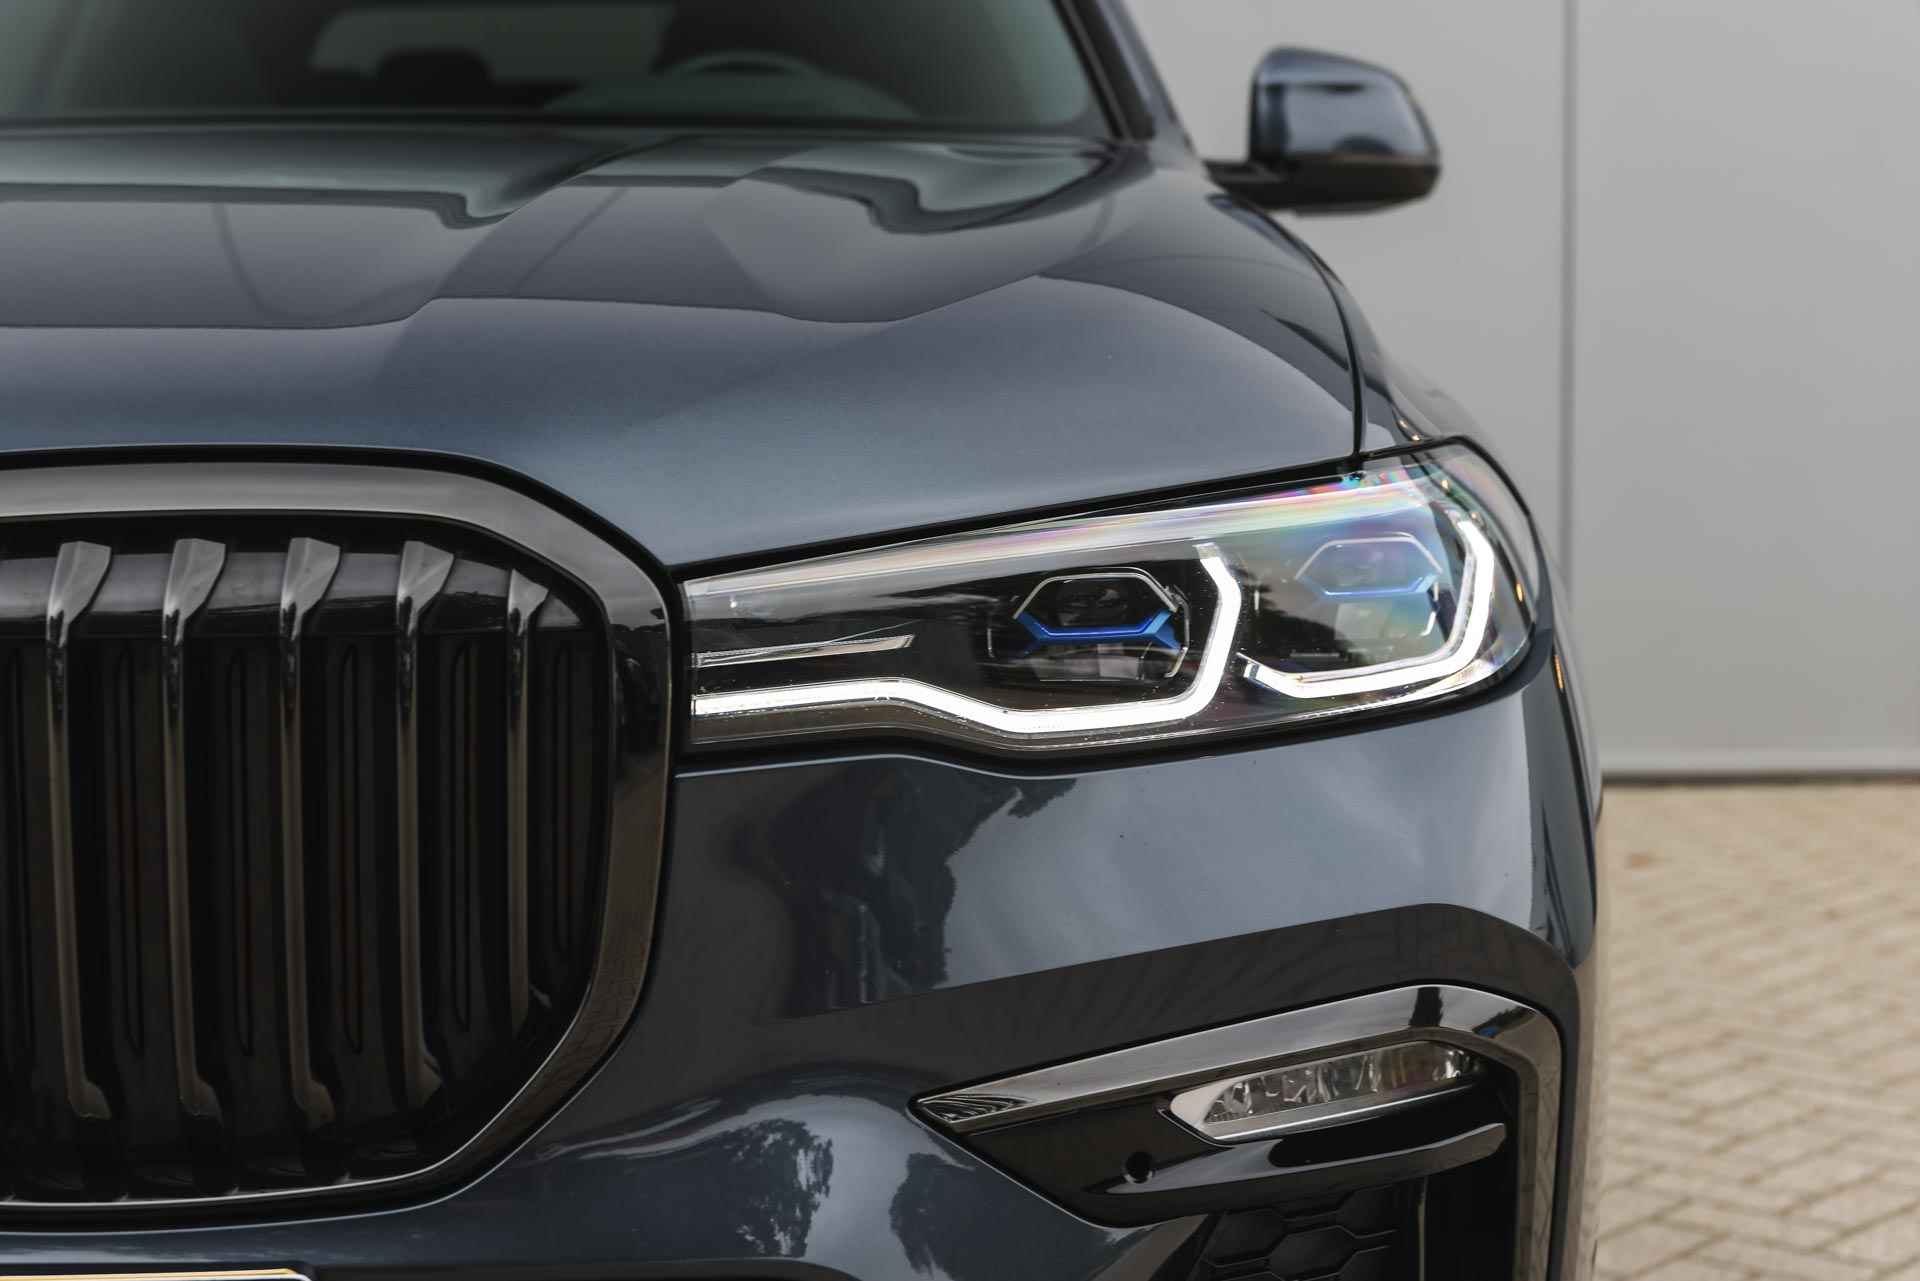 BMW X7 M50i High Executive Automaat / Active Steering / Stoelventilatie / Laserlight / Soft Close / Head-Up / Gesture Control / Parking Assistant Plus / Alpina wielen 23 inch - 40/56